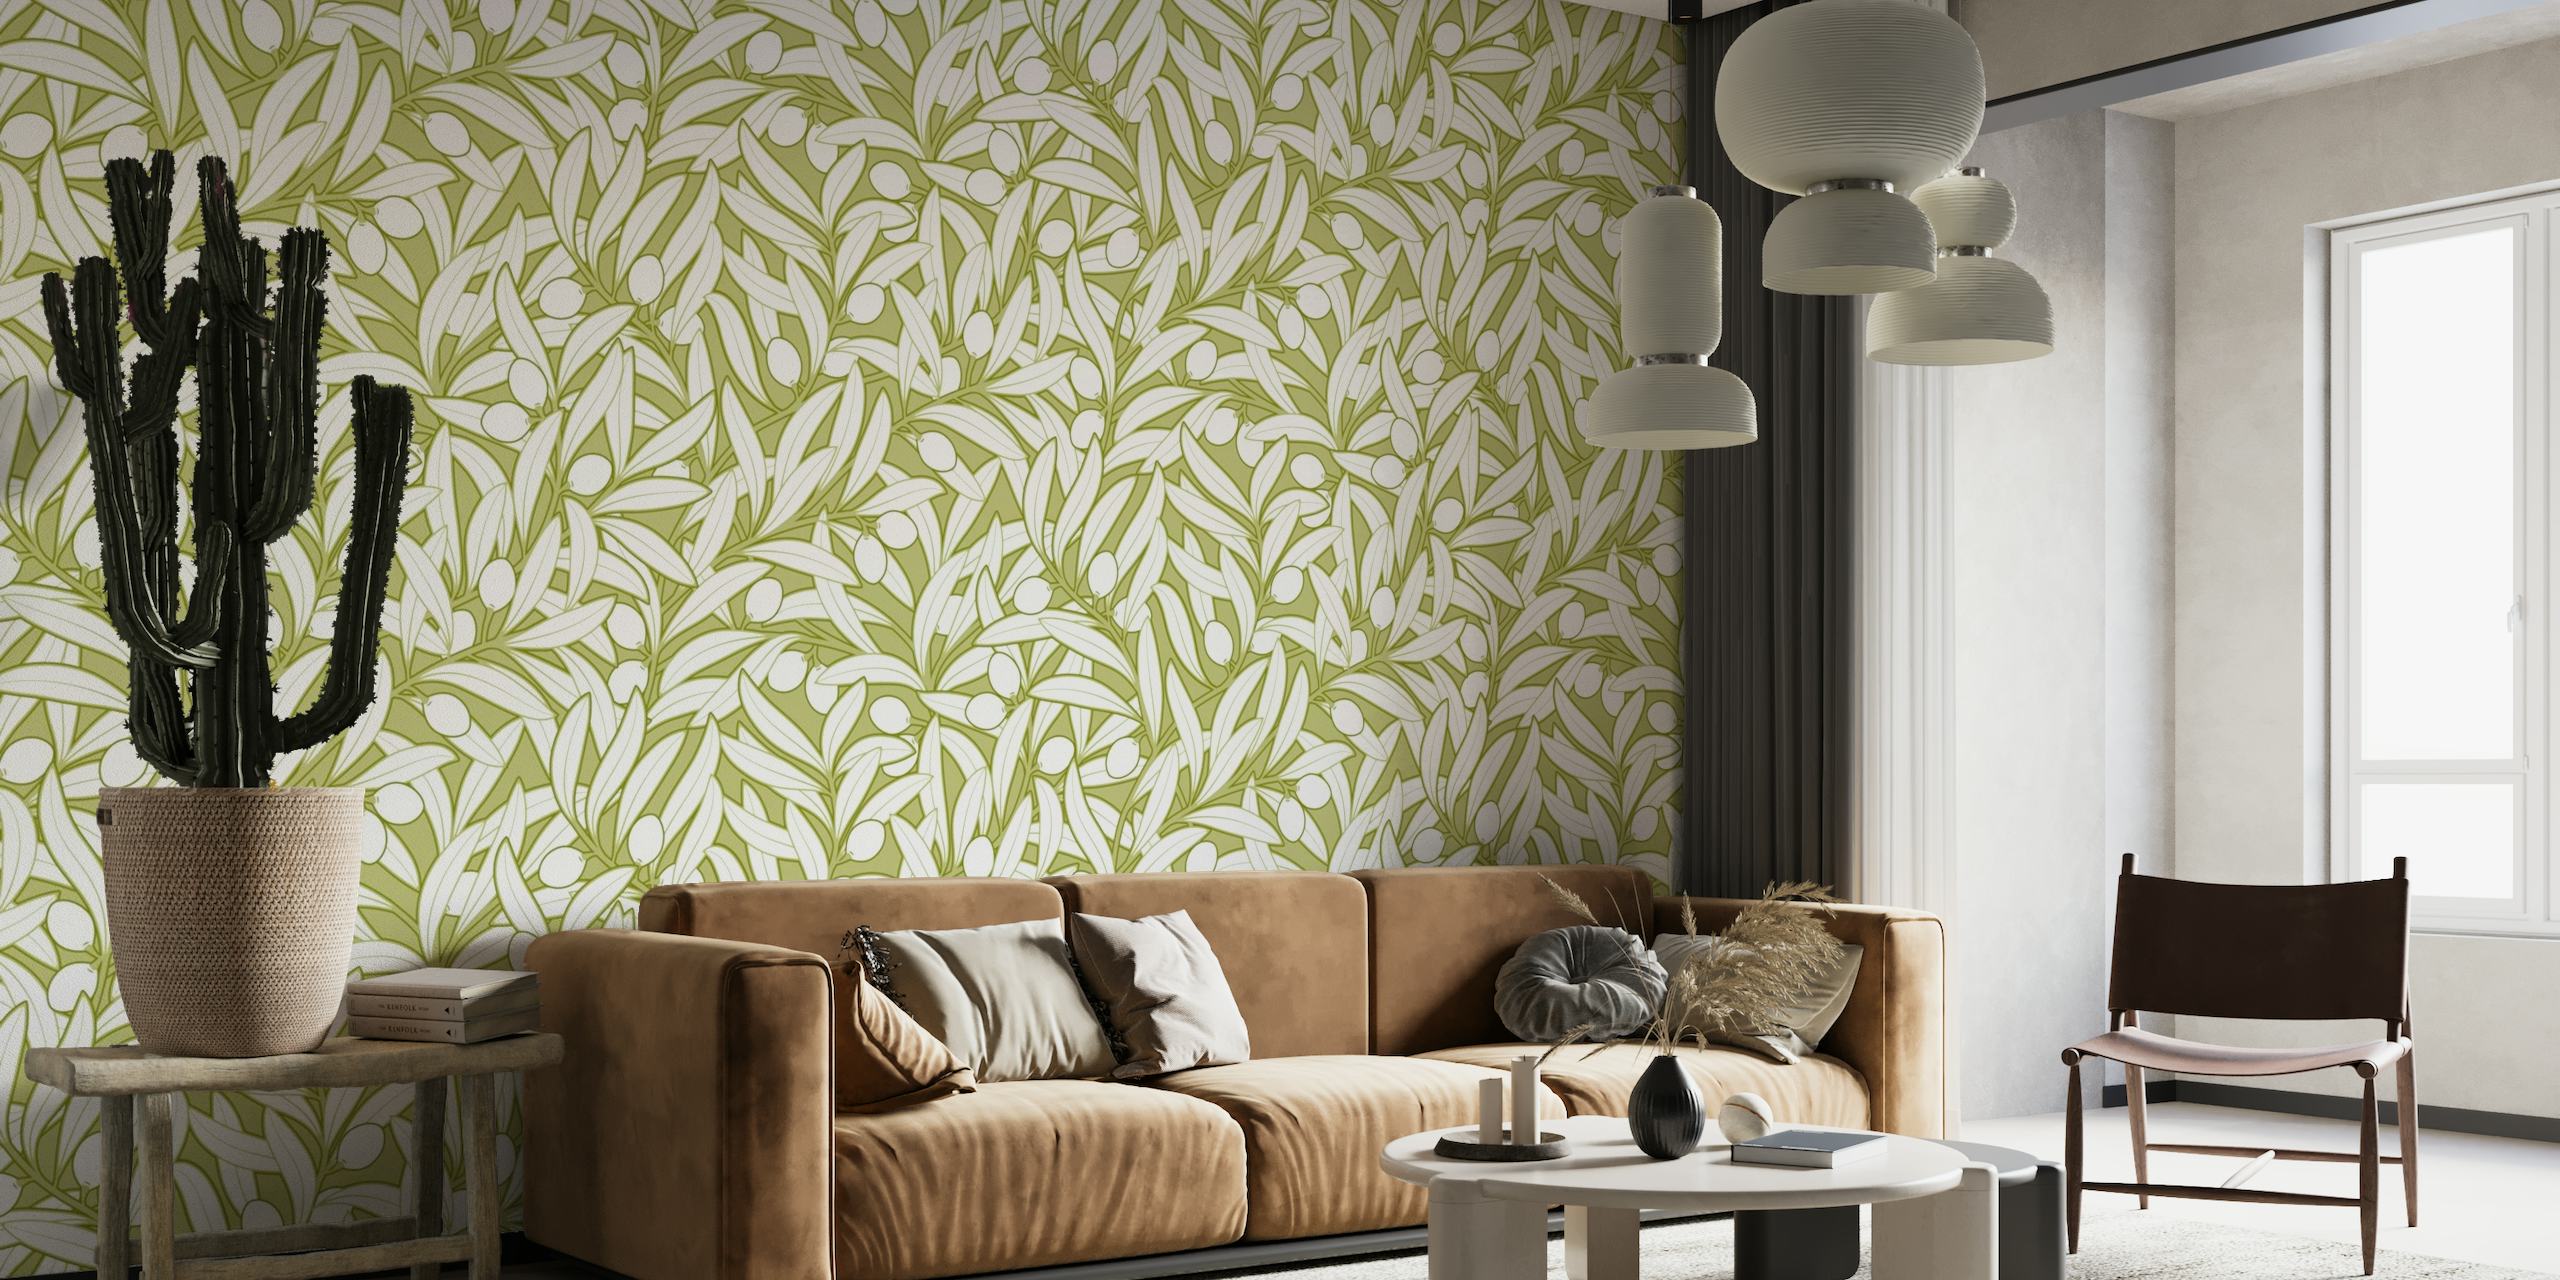 Neutral olive-colored wall mural with a pattern of olive branches